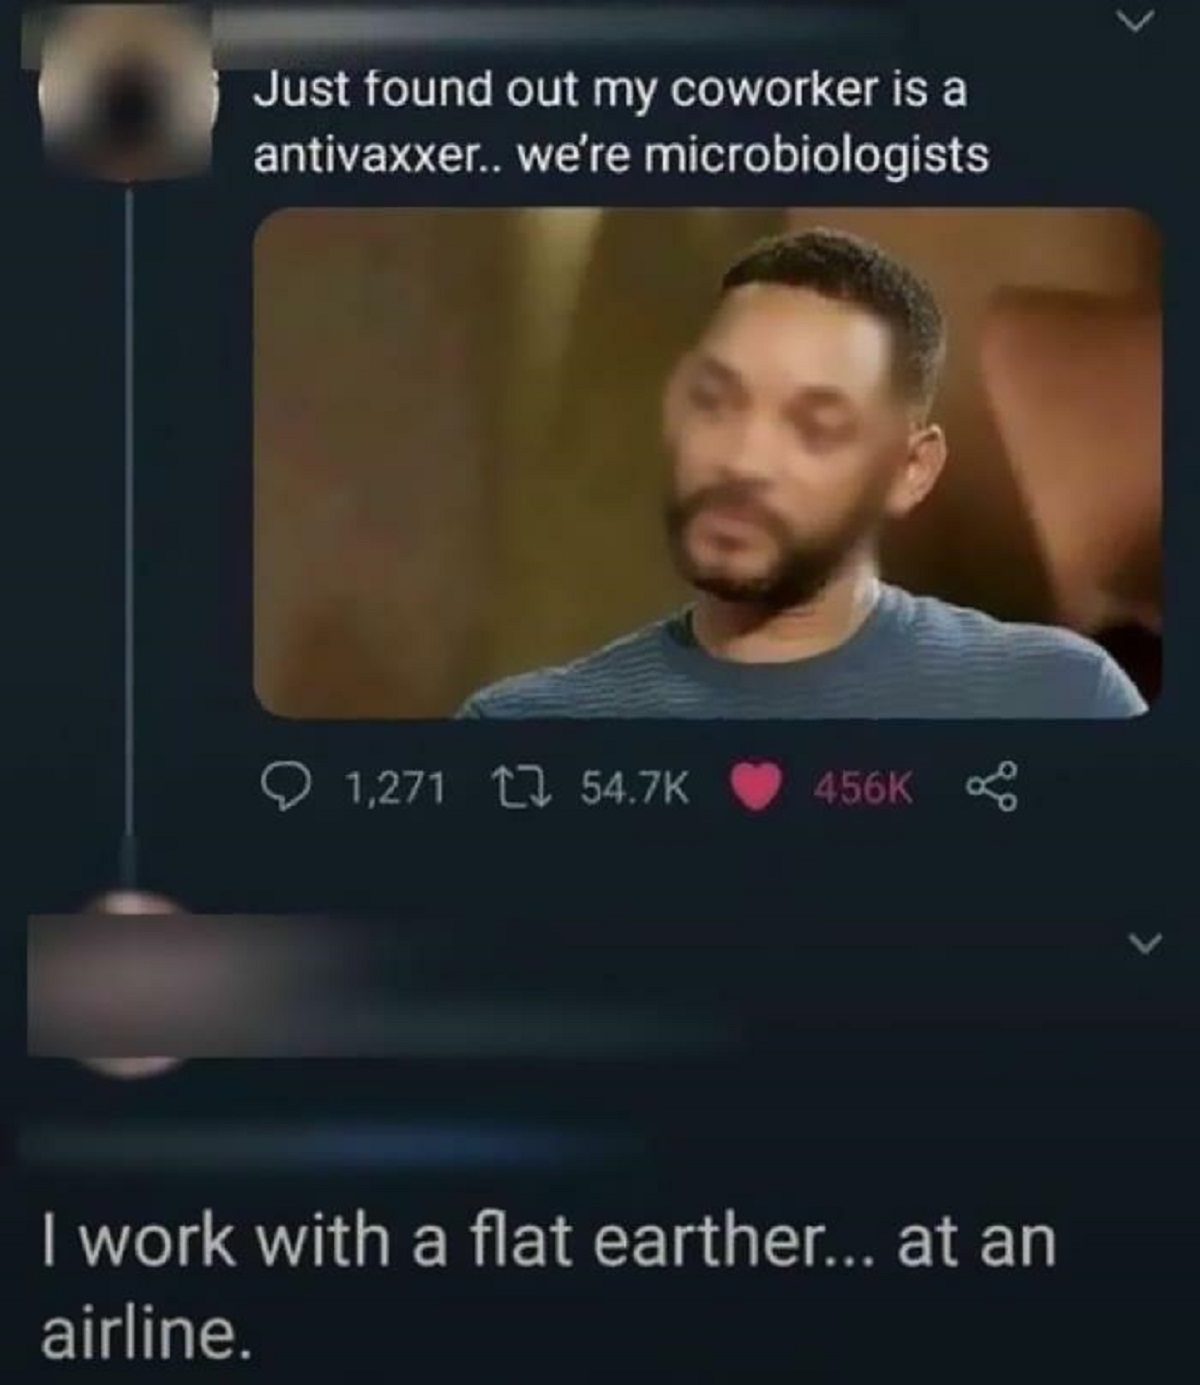 new cringe post - Just found out my coworker is a antivaxxer.. we're microbiologists 1,271 I work with a flat earther... at an airline.